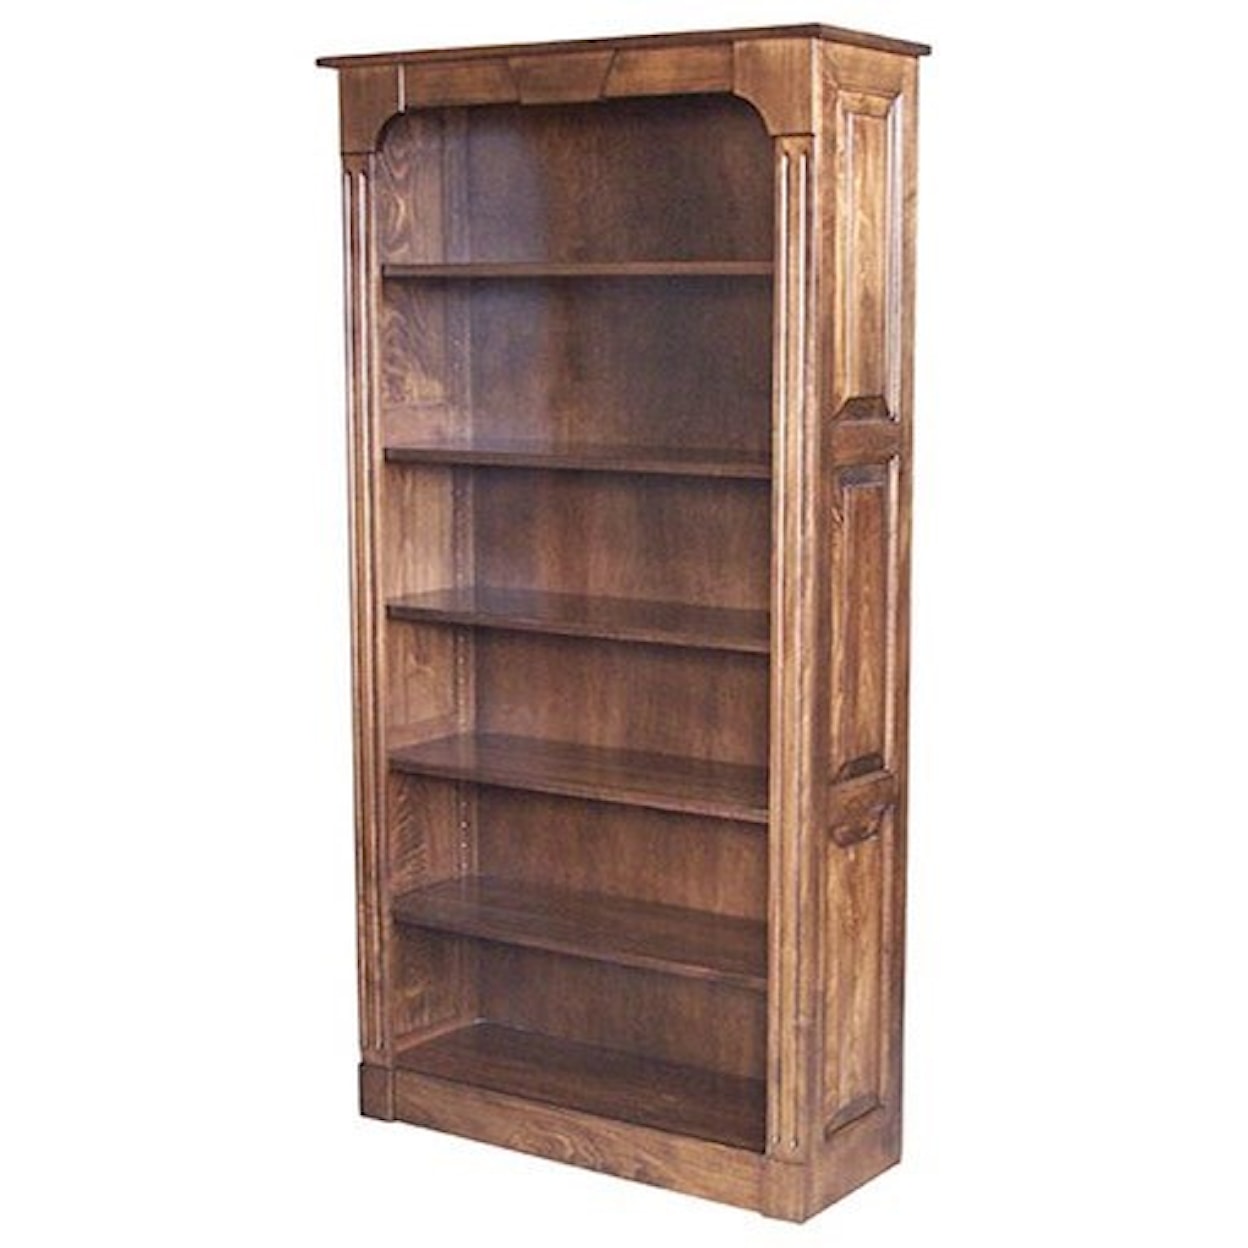 E&I Woodworking Northport Northport 72 Raised Panel Bookcase